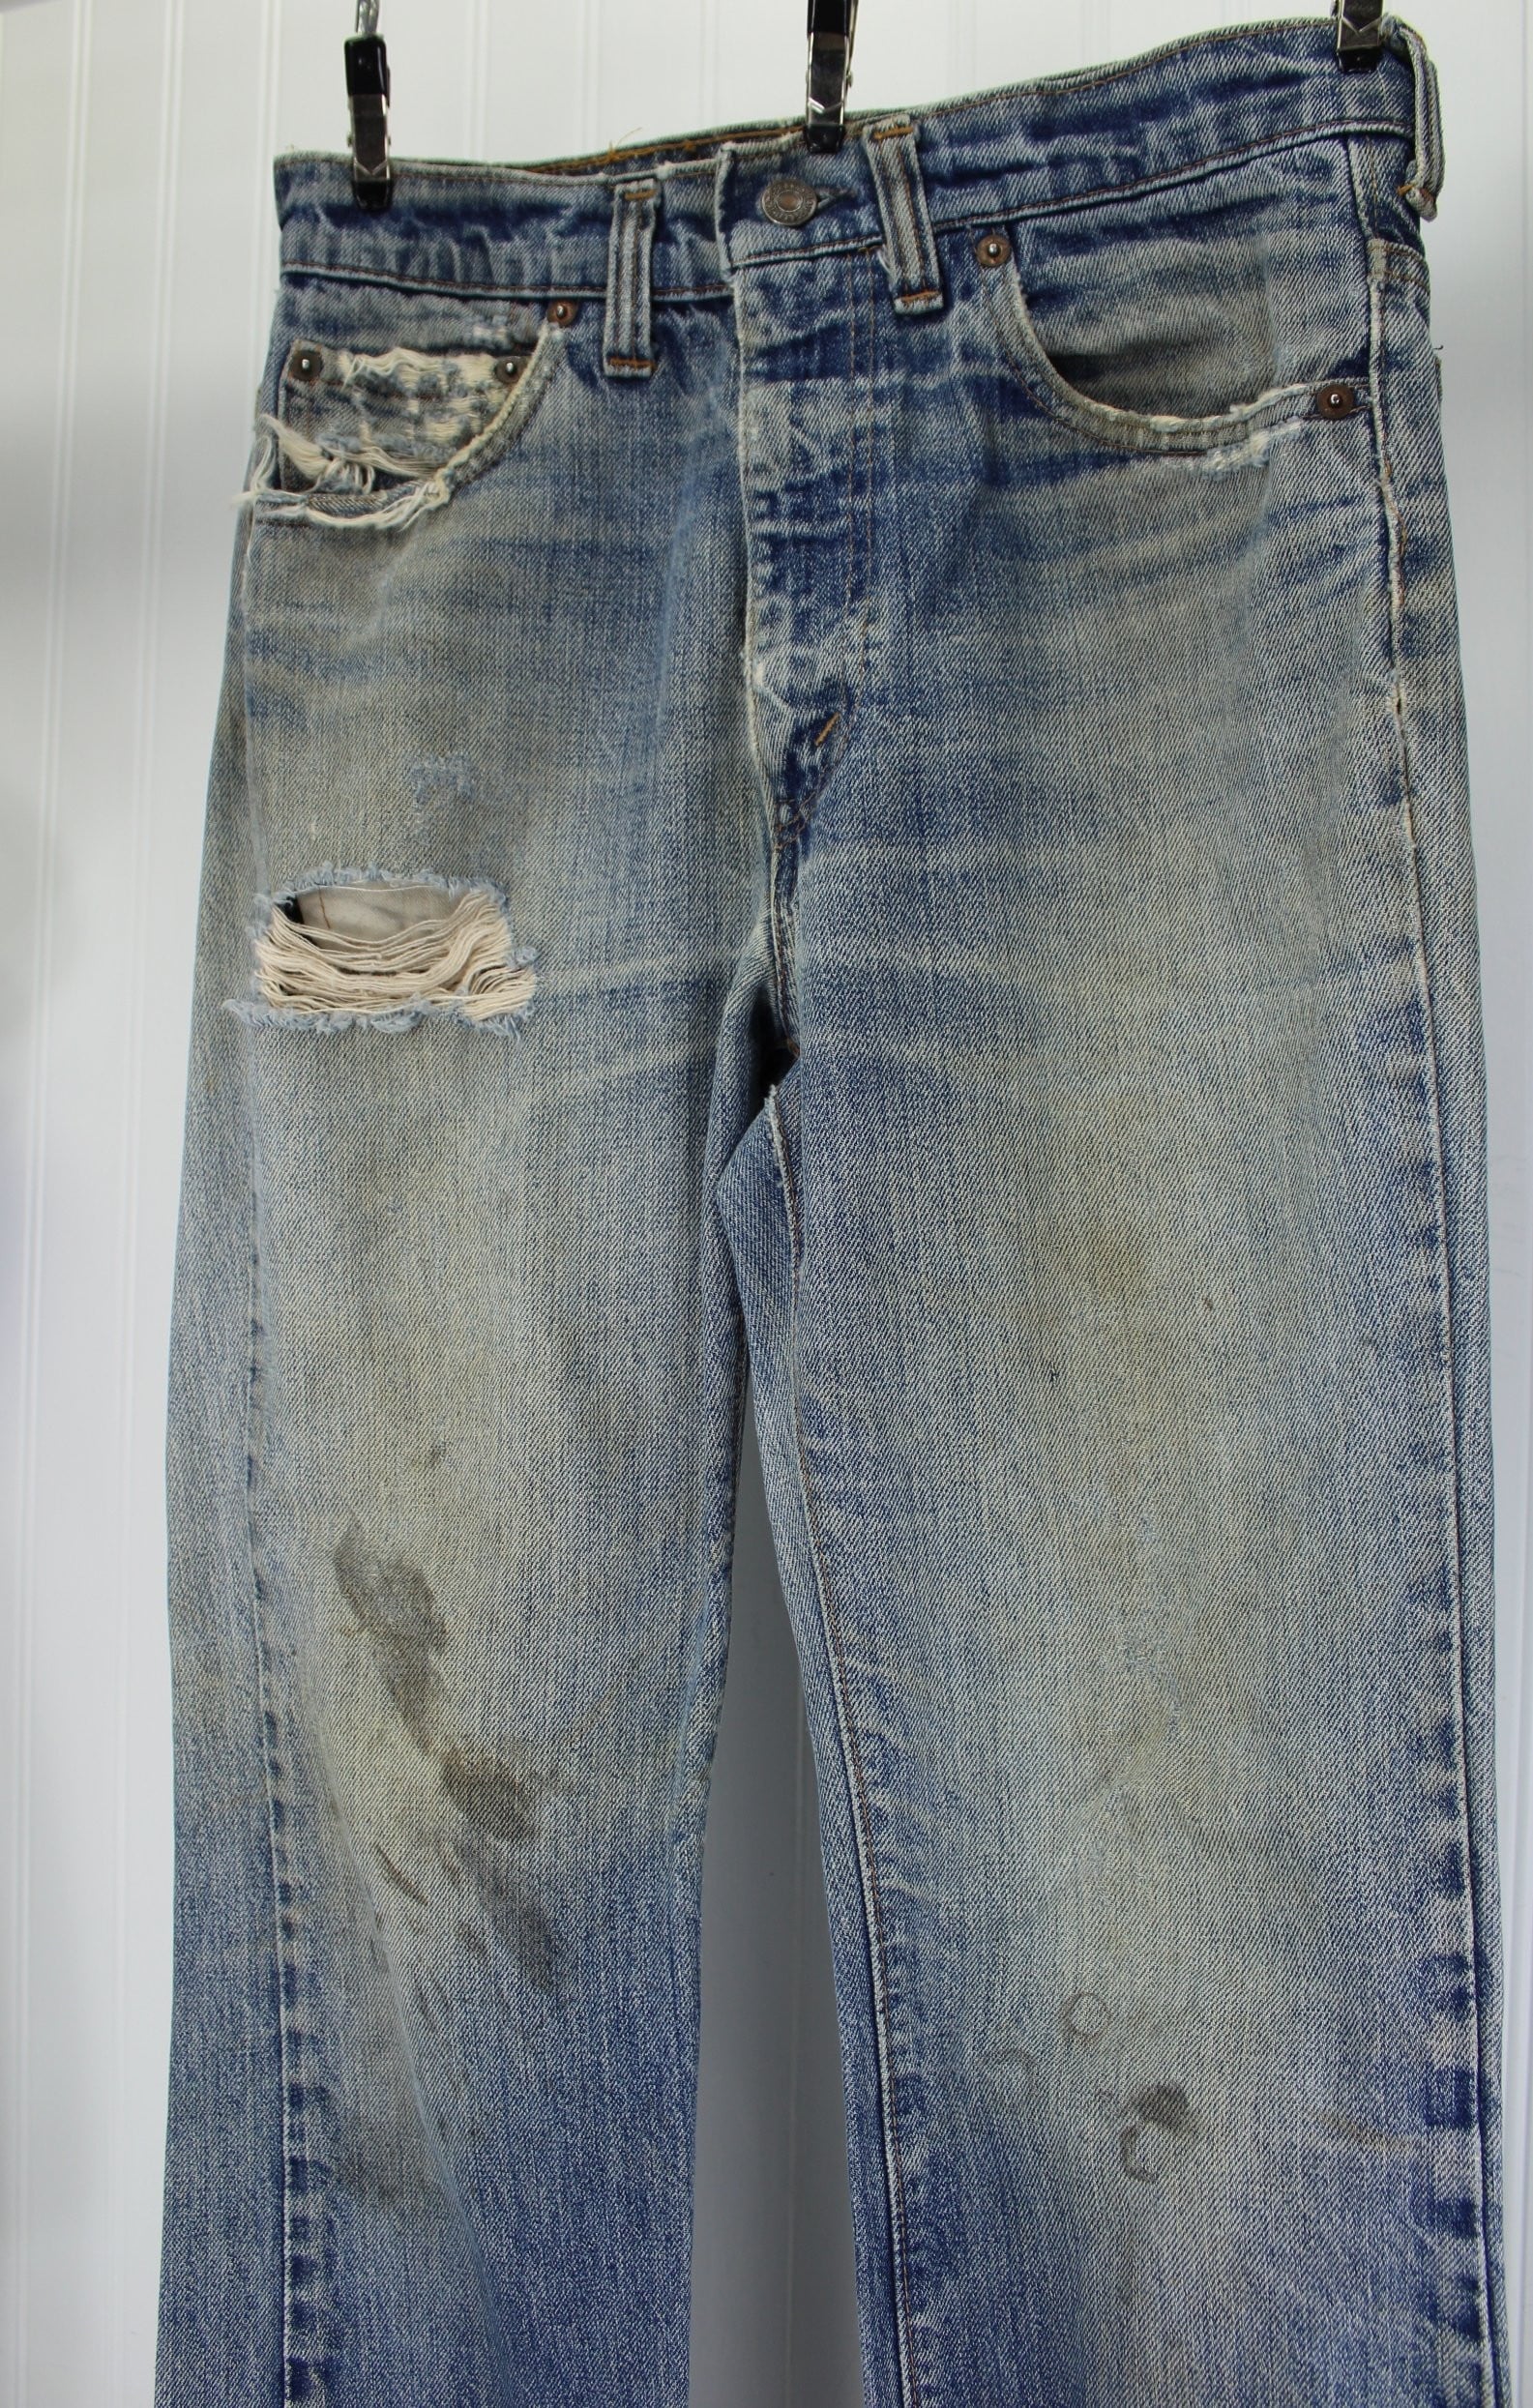 Vintage Levi's Skate Boarder Distressed Grunge  Jeans - Early 1990s - Waist 29" Red Tab one of kind